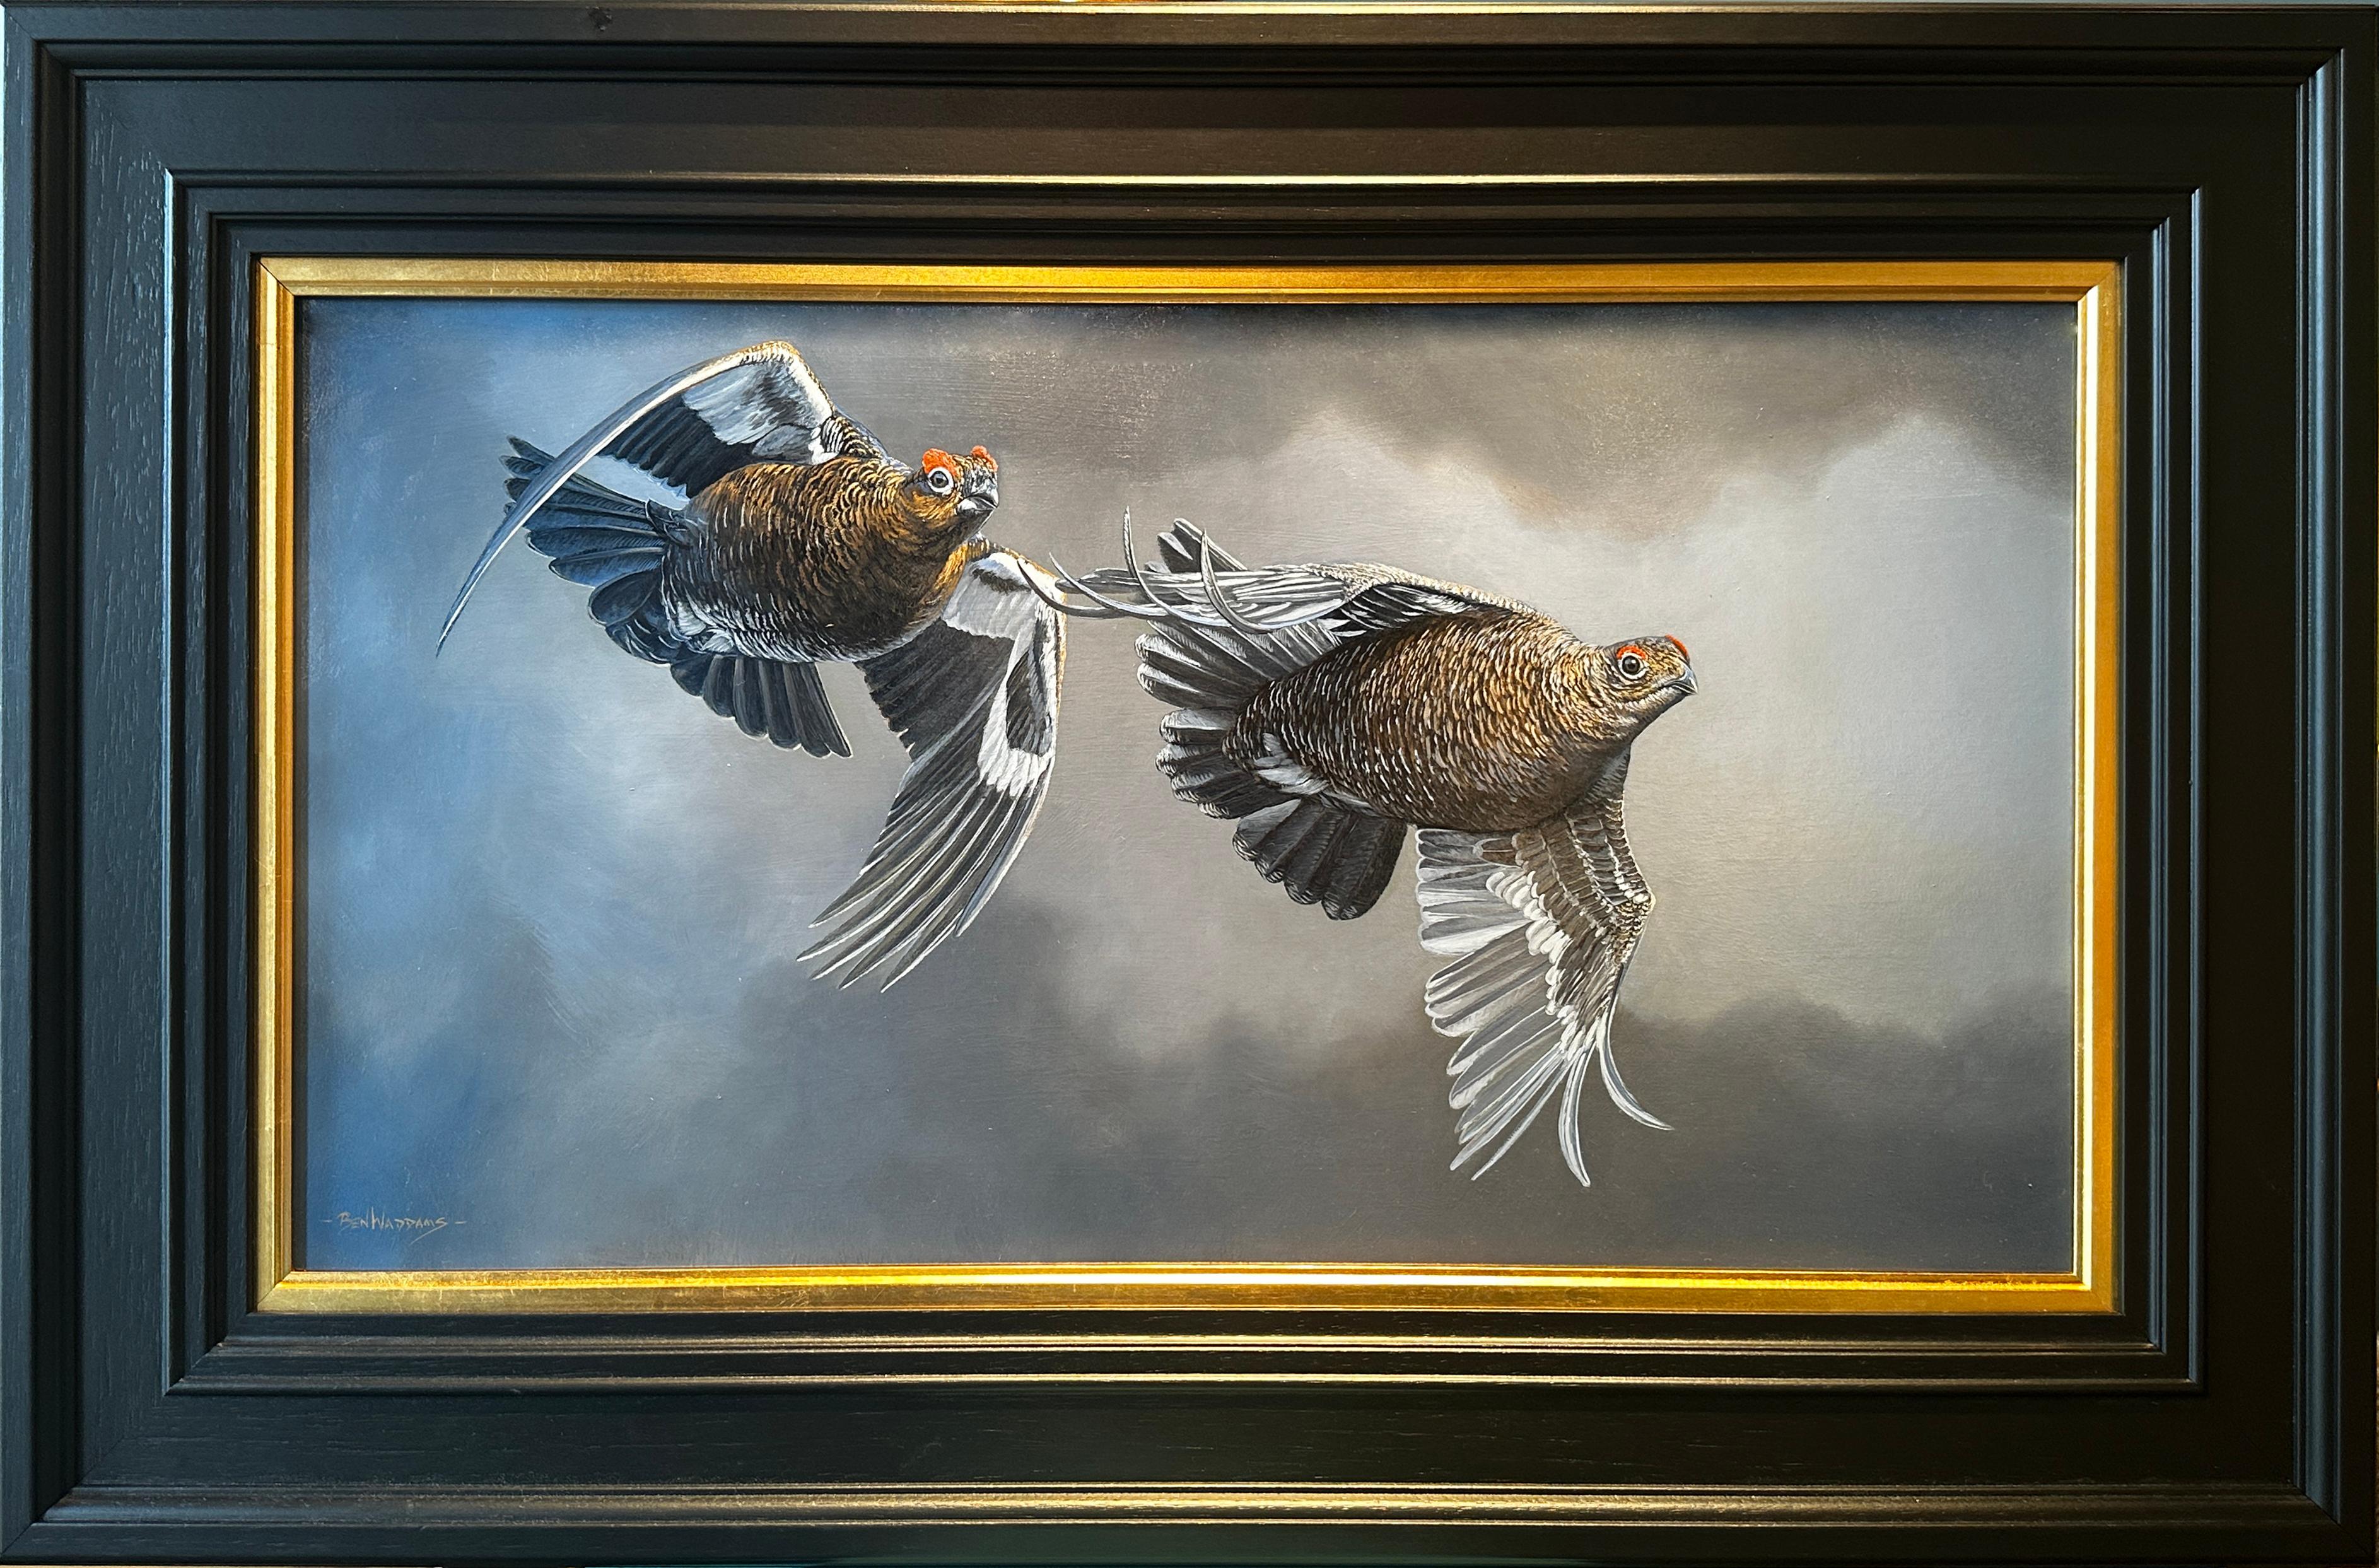 Ben Waddams Animal Painting - 'Follow the Leader' photorealist painting of two grouse birds flying, grey/black